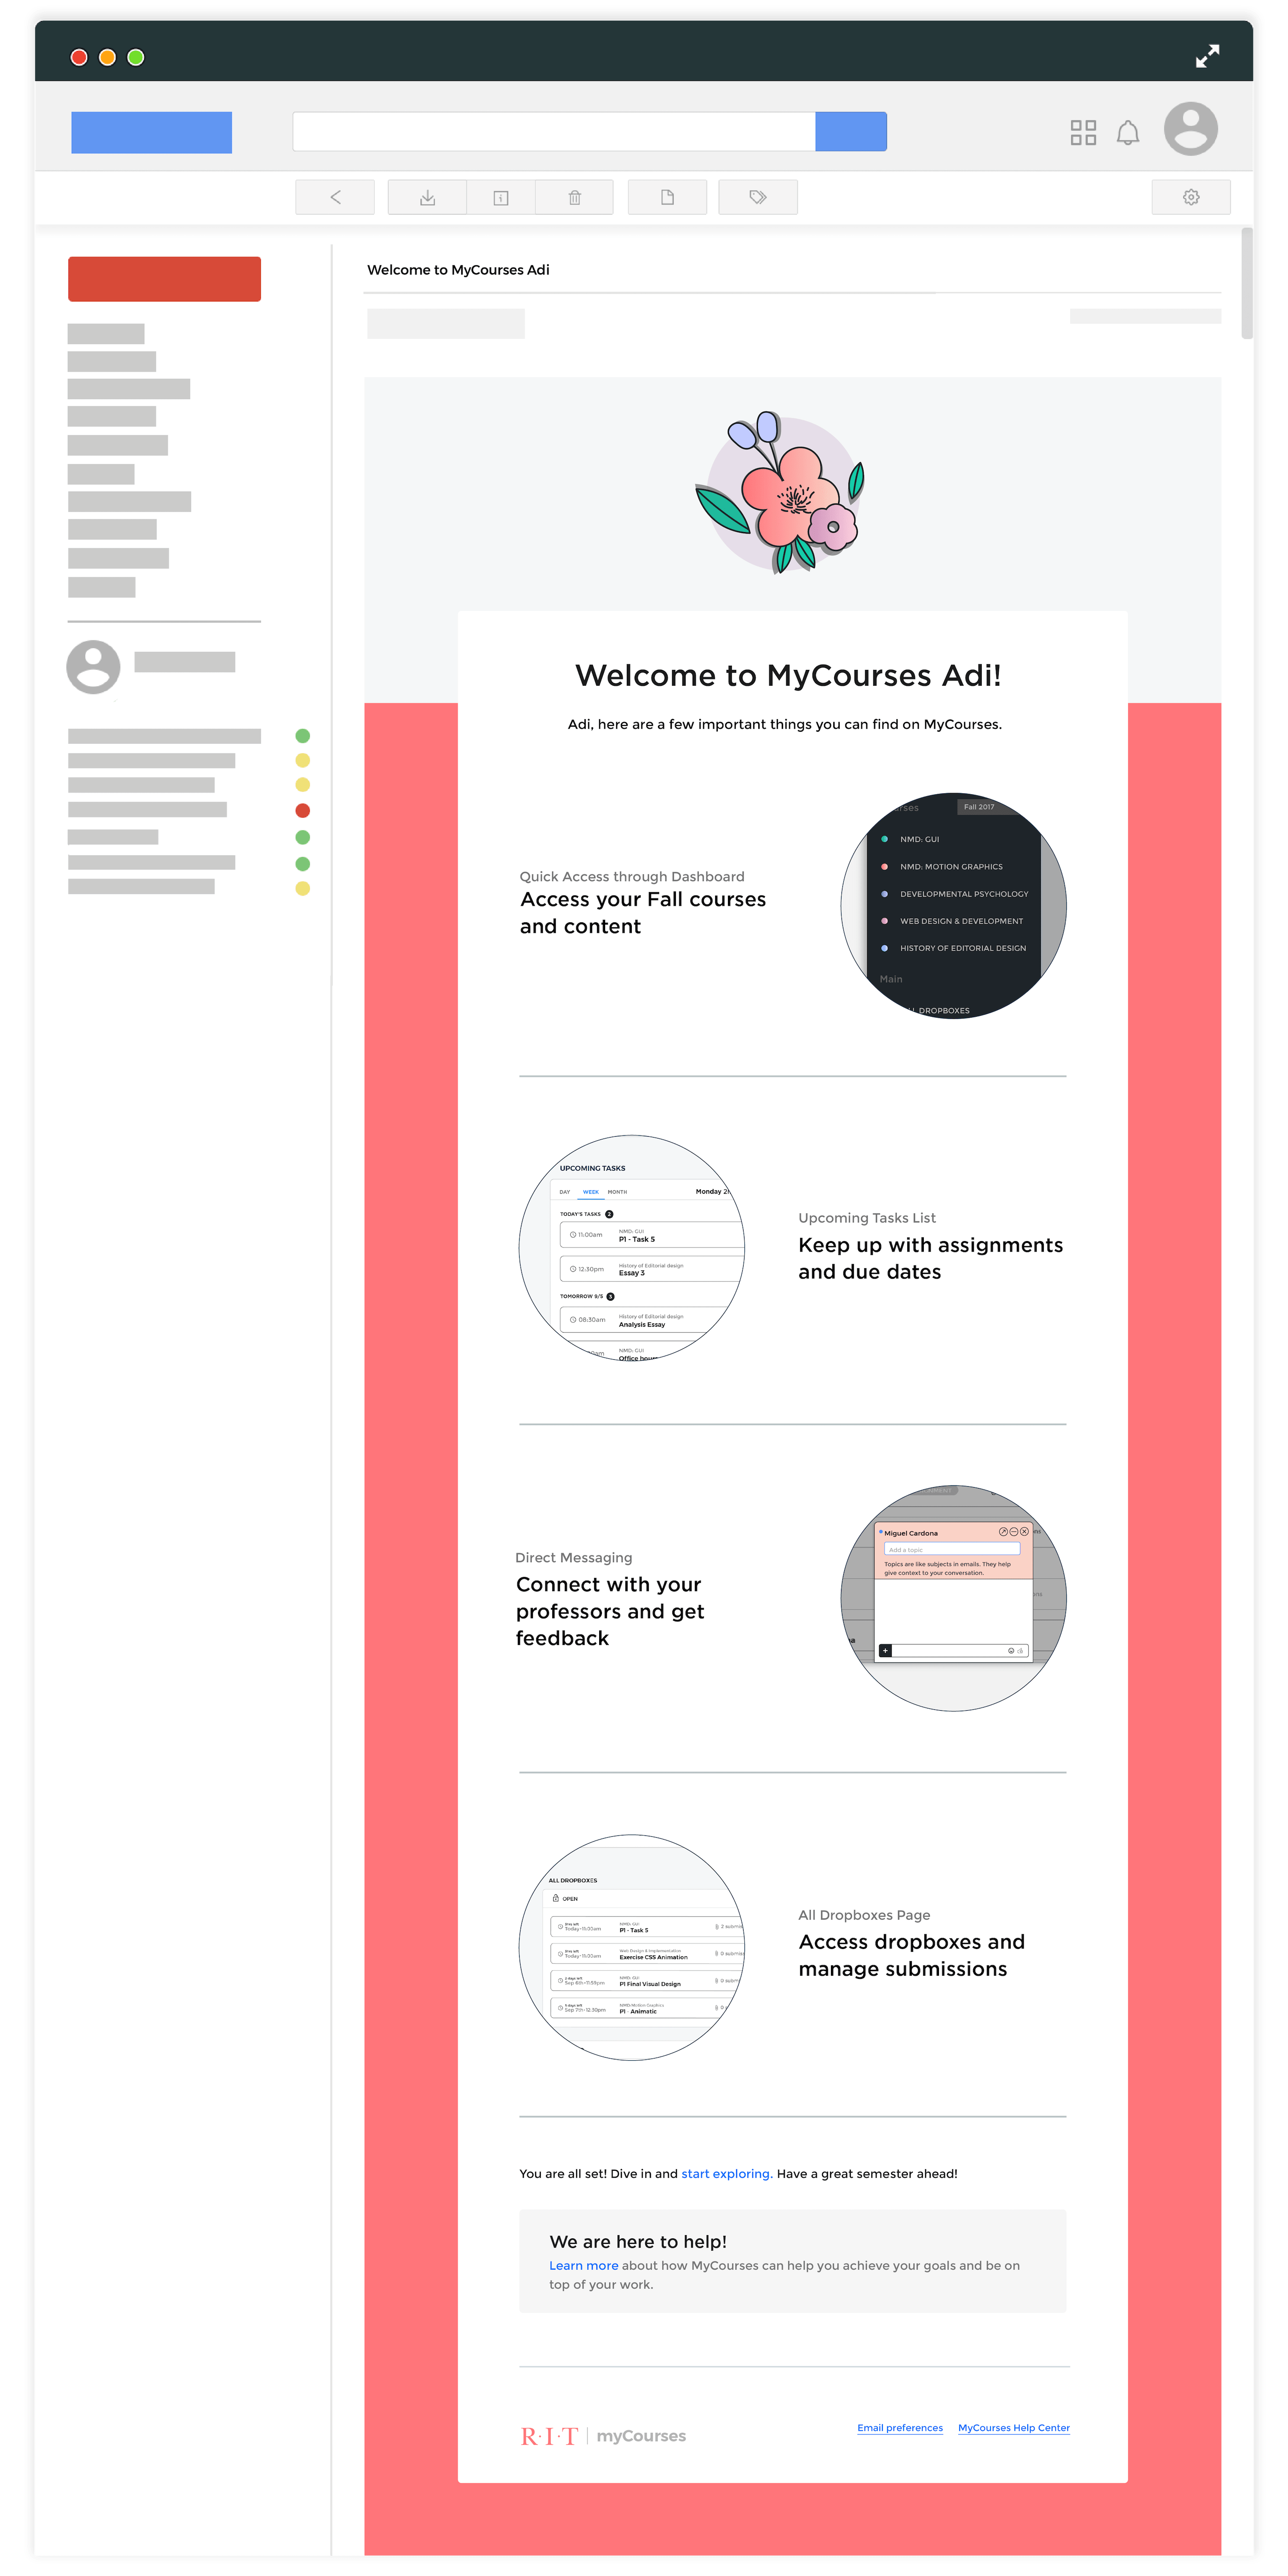 Email mockup showing important features of the app